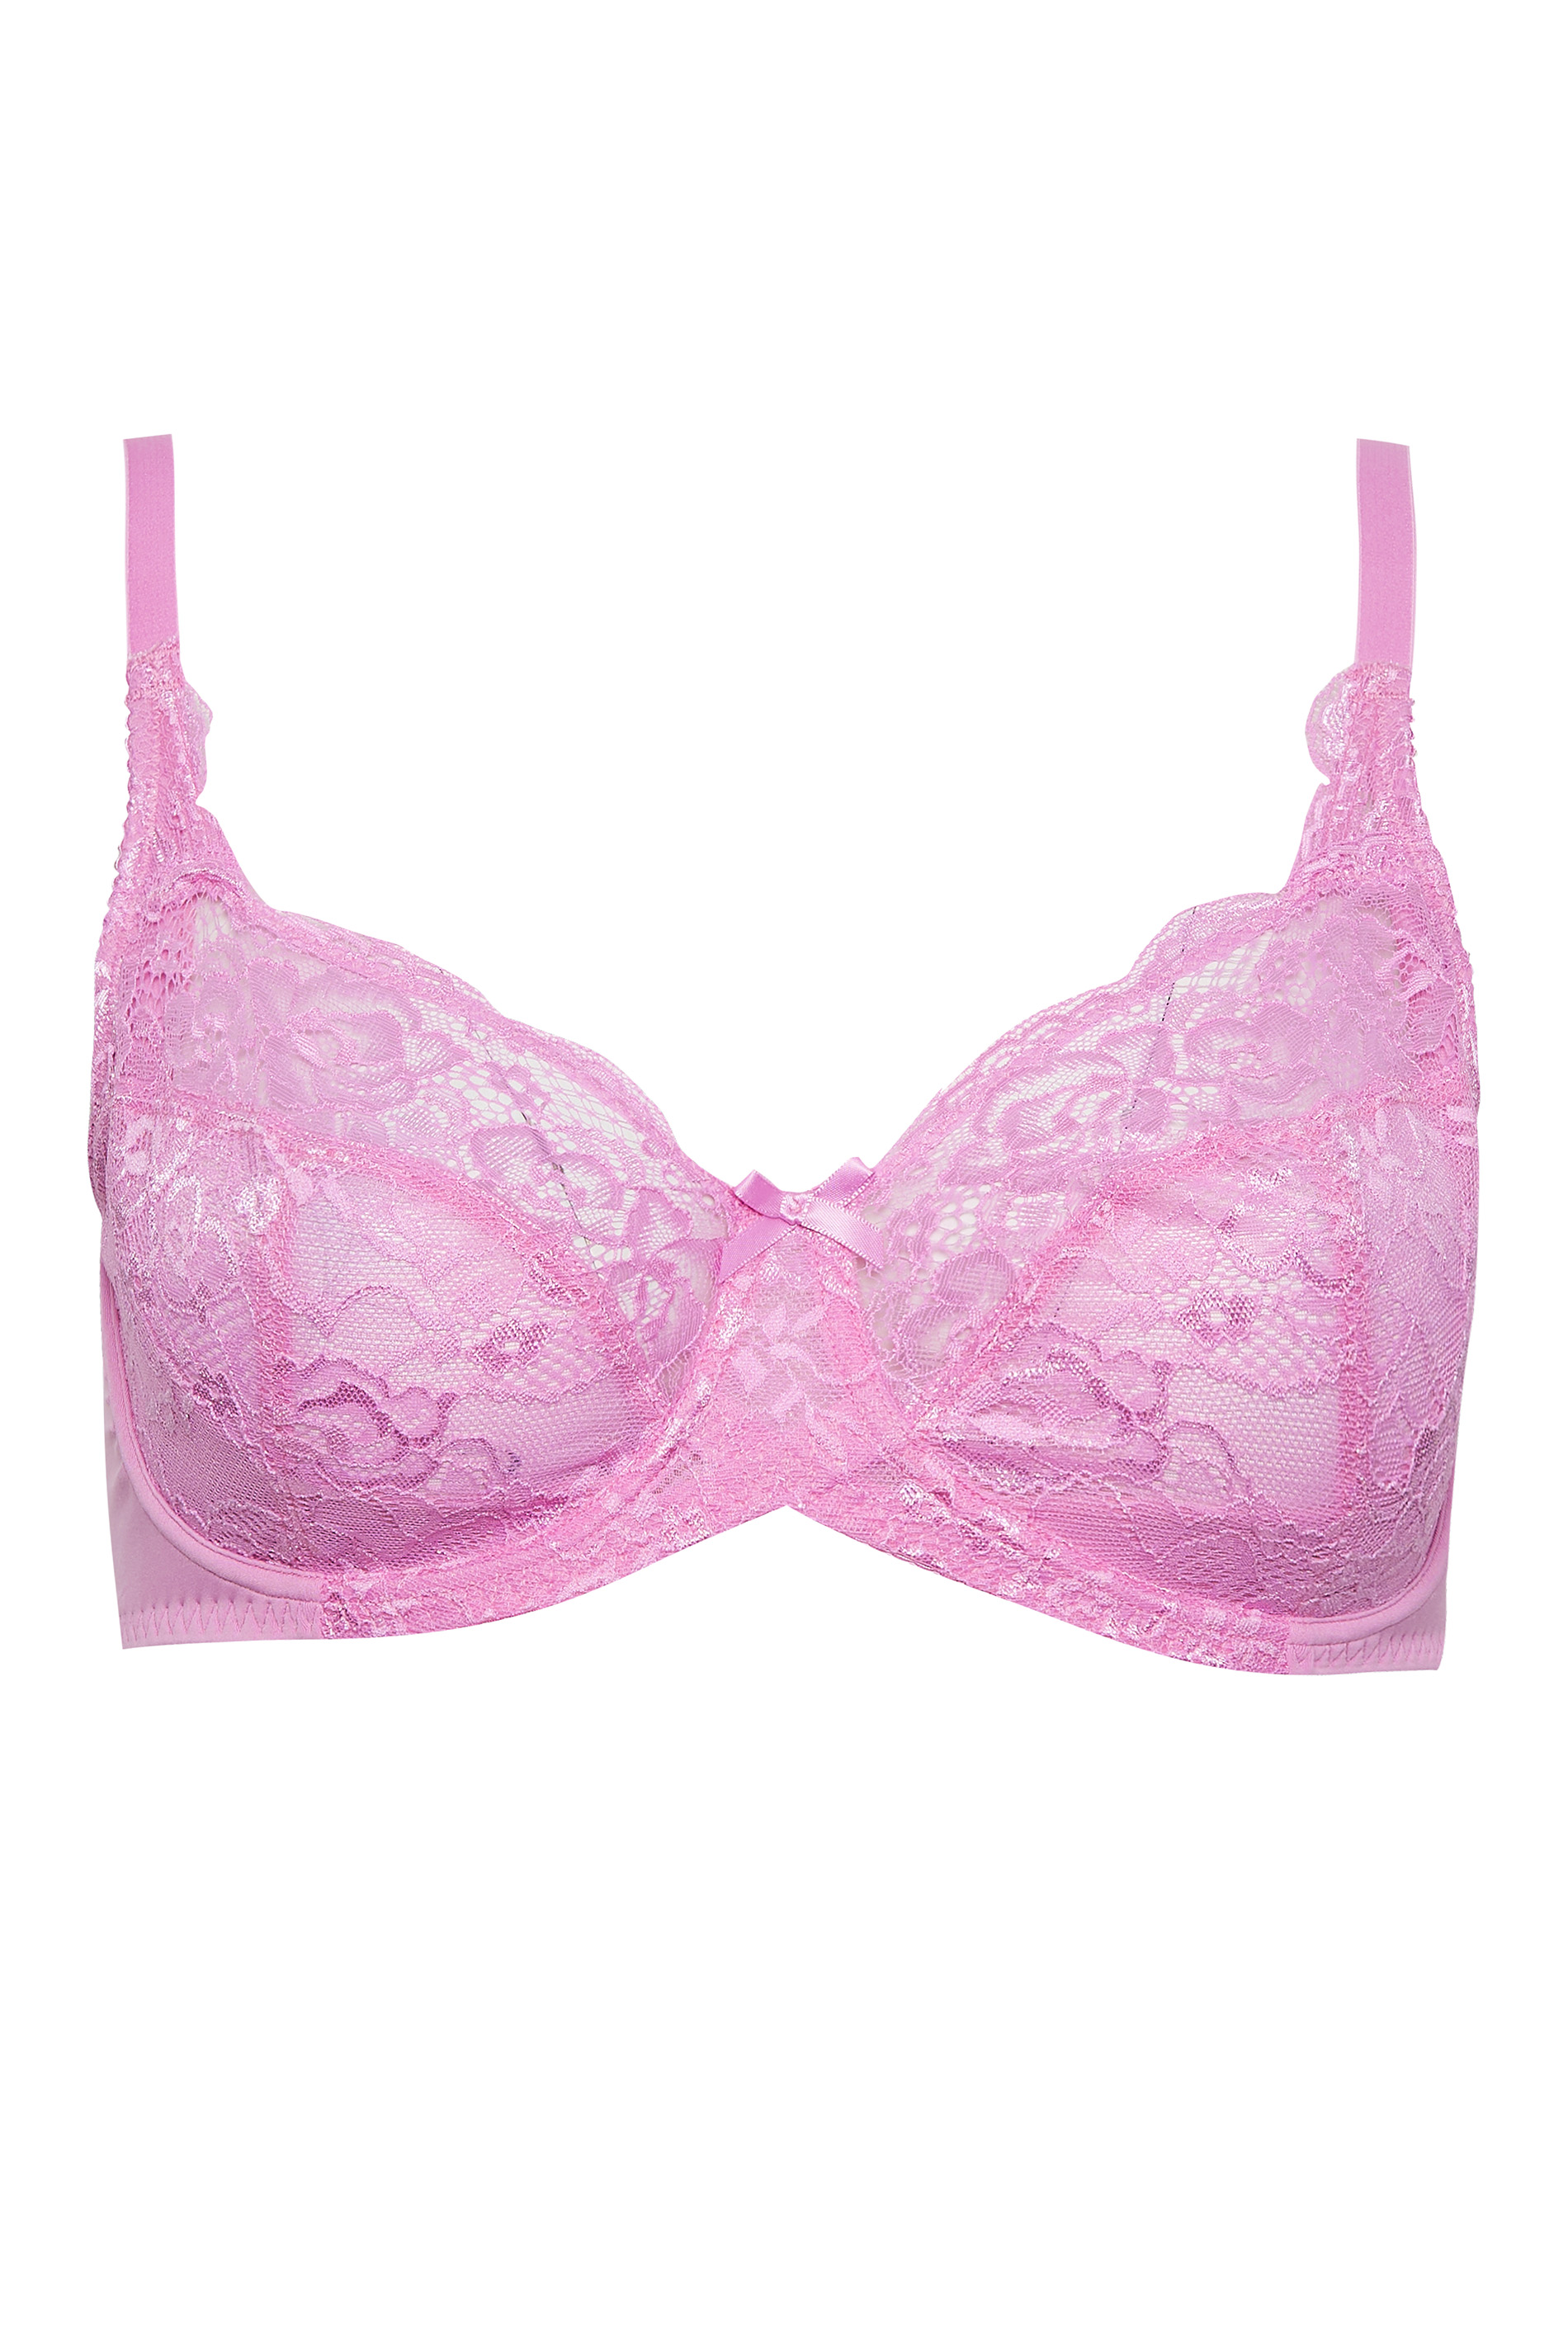 TOWED22 Wireless Bra For Women,Women's Underwired Non Padding Floral Lace  Breathable Balconette Bra,Pink